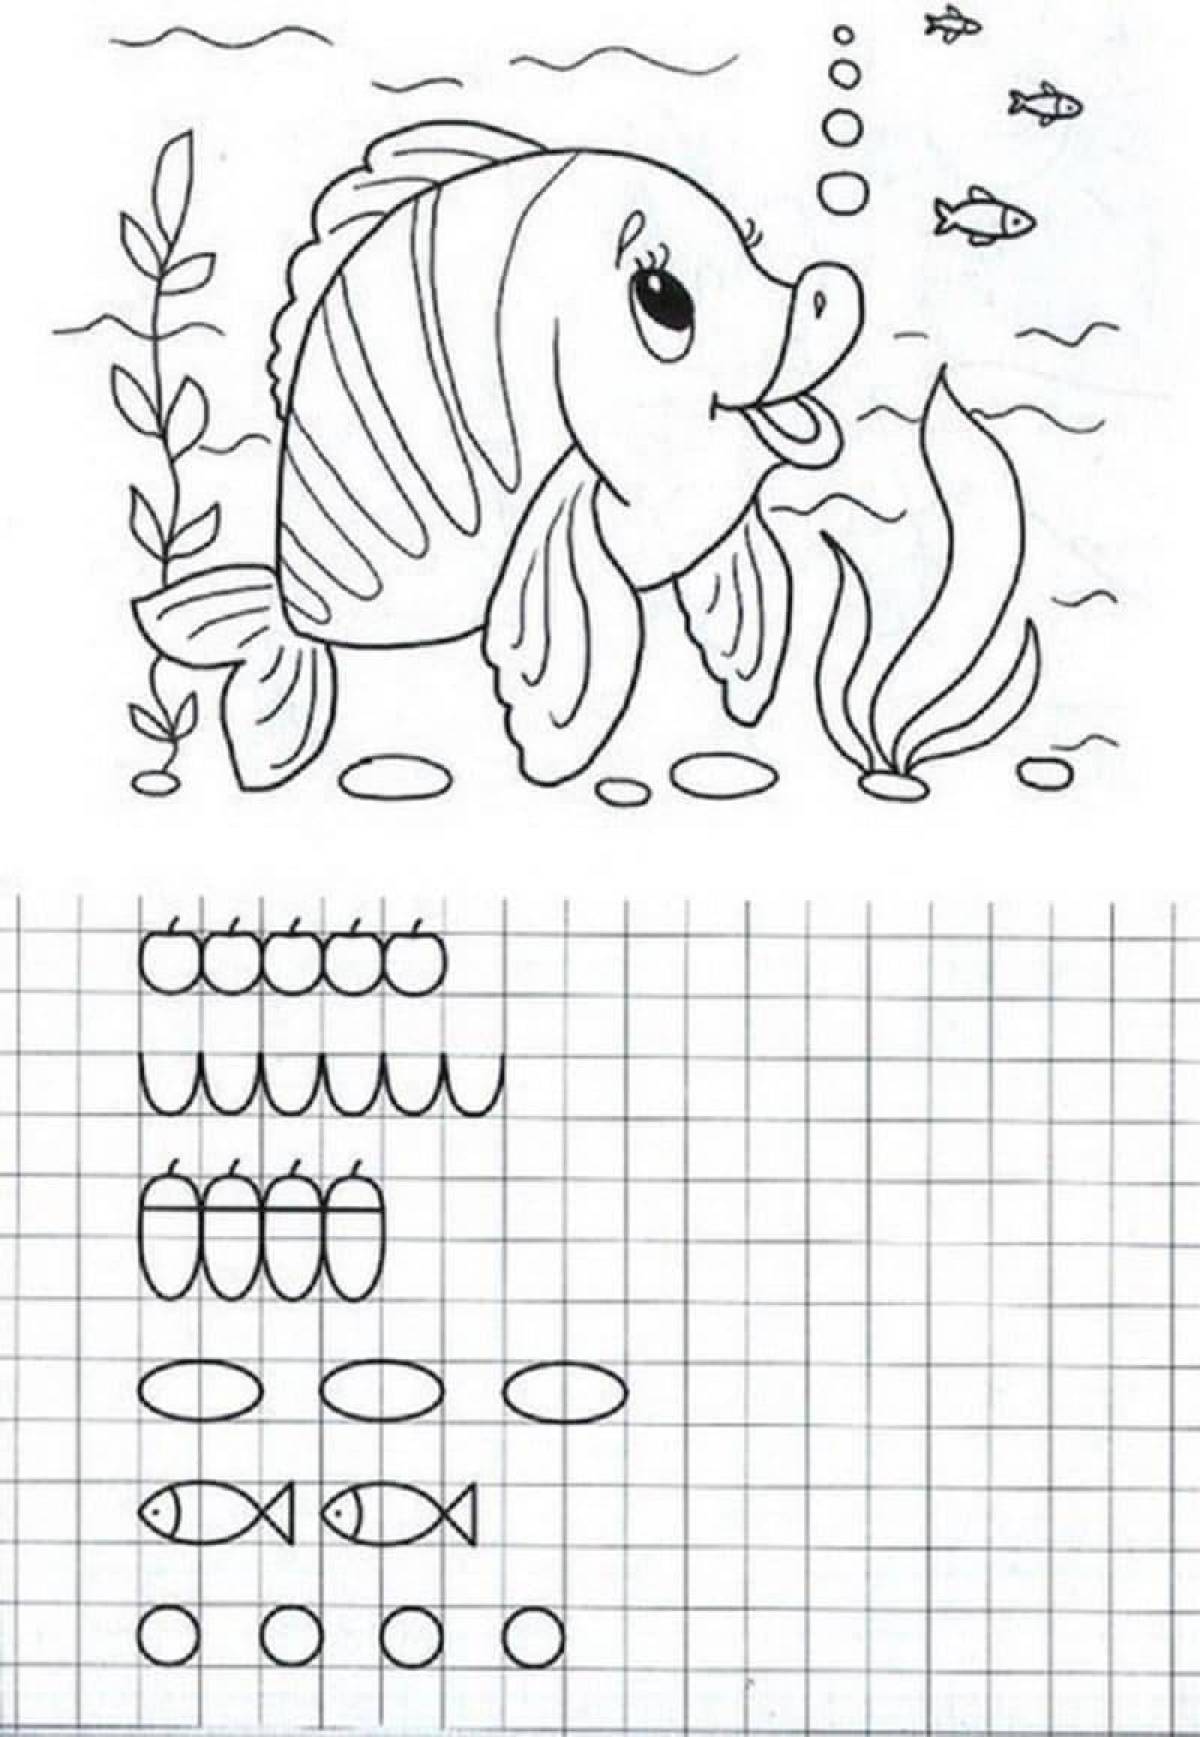 Creative coloring book for preschoolers 6-7 years old